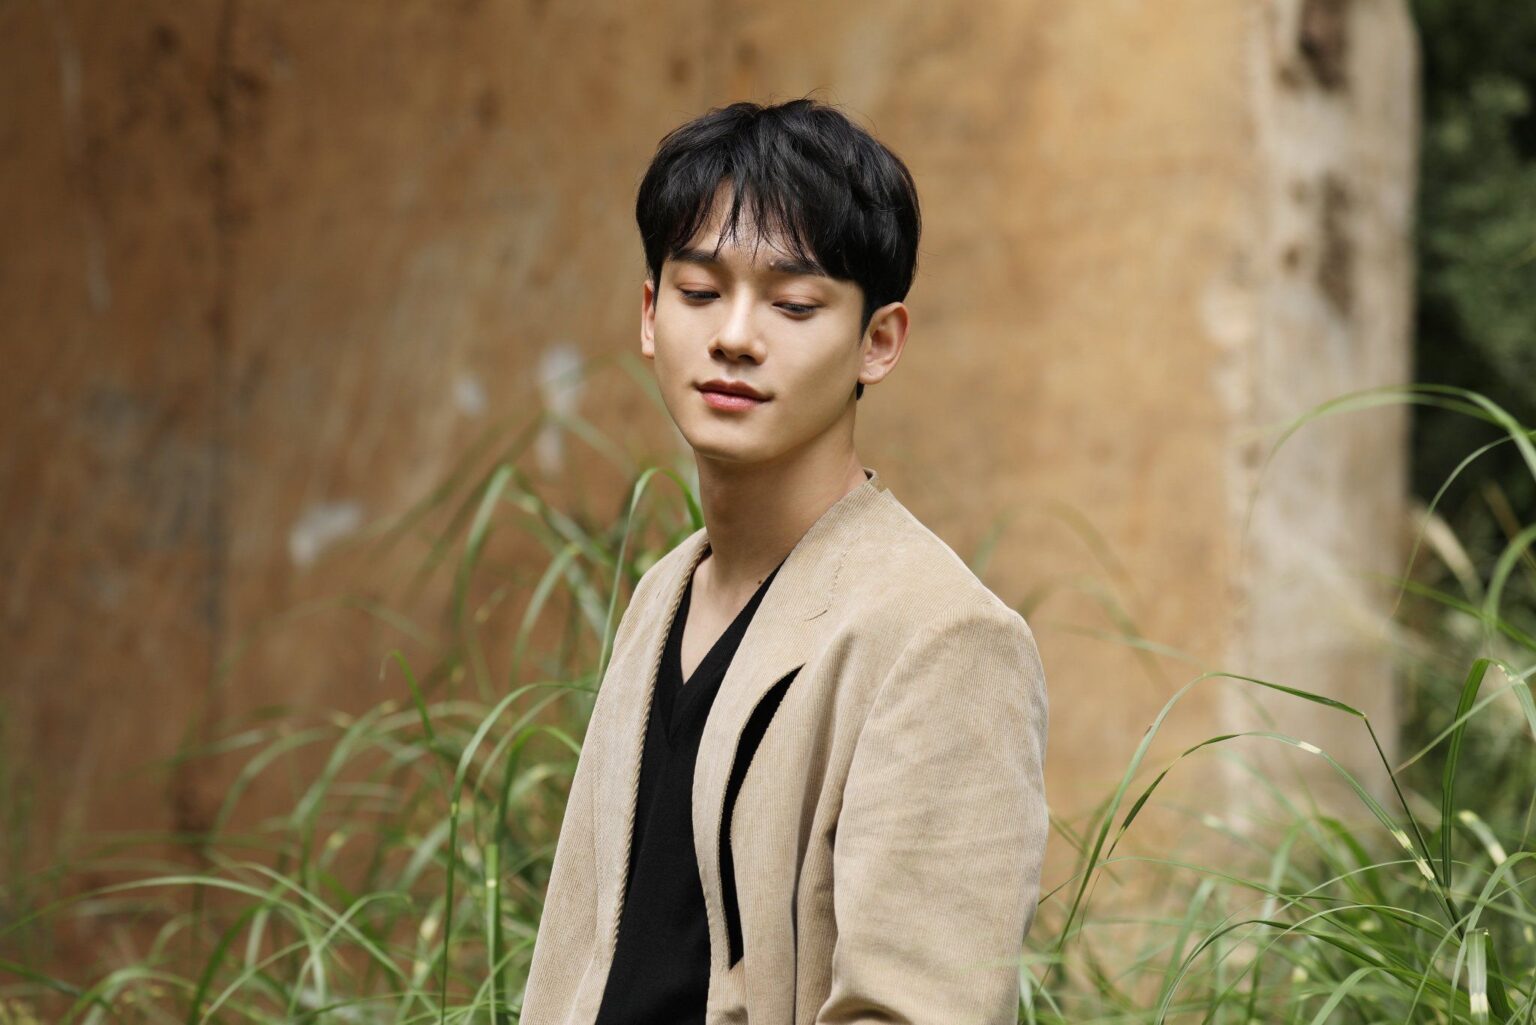 EXO member Chen might be your new favorite K-pop personality. Let’s take a look at his fascinating life.